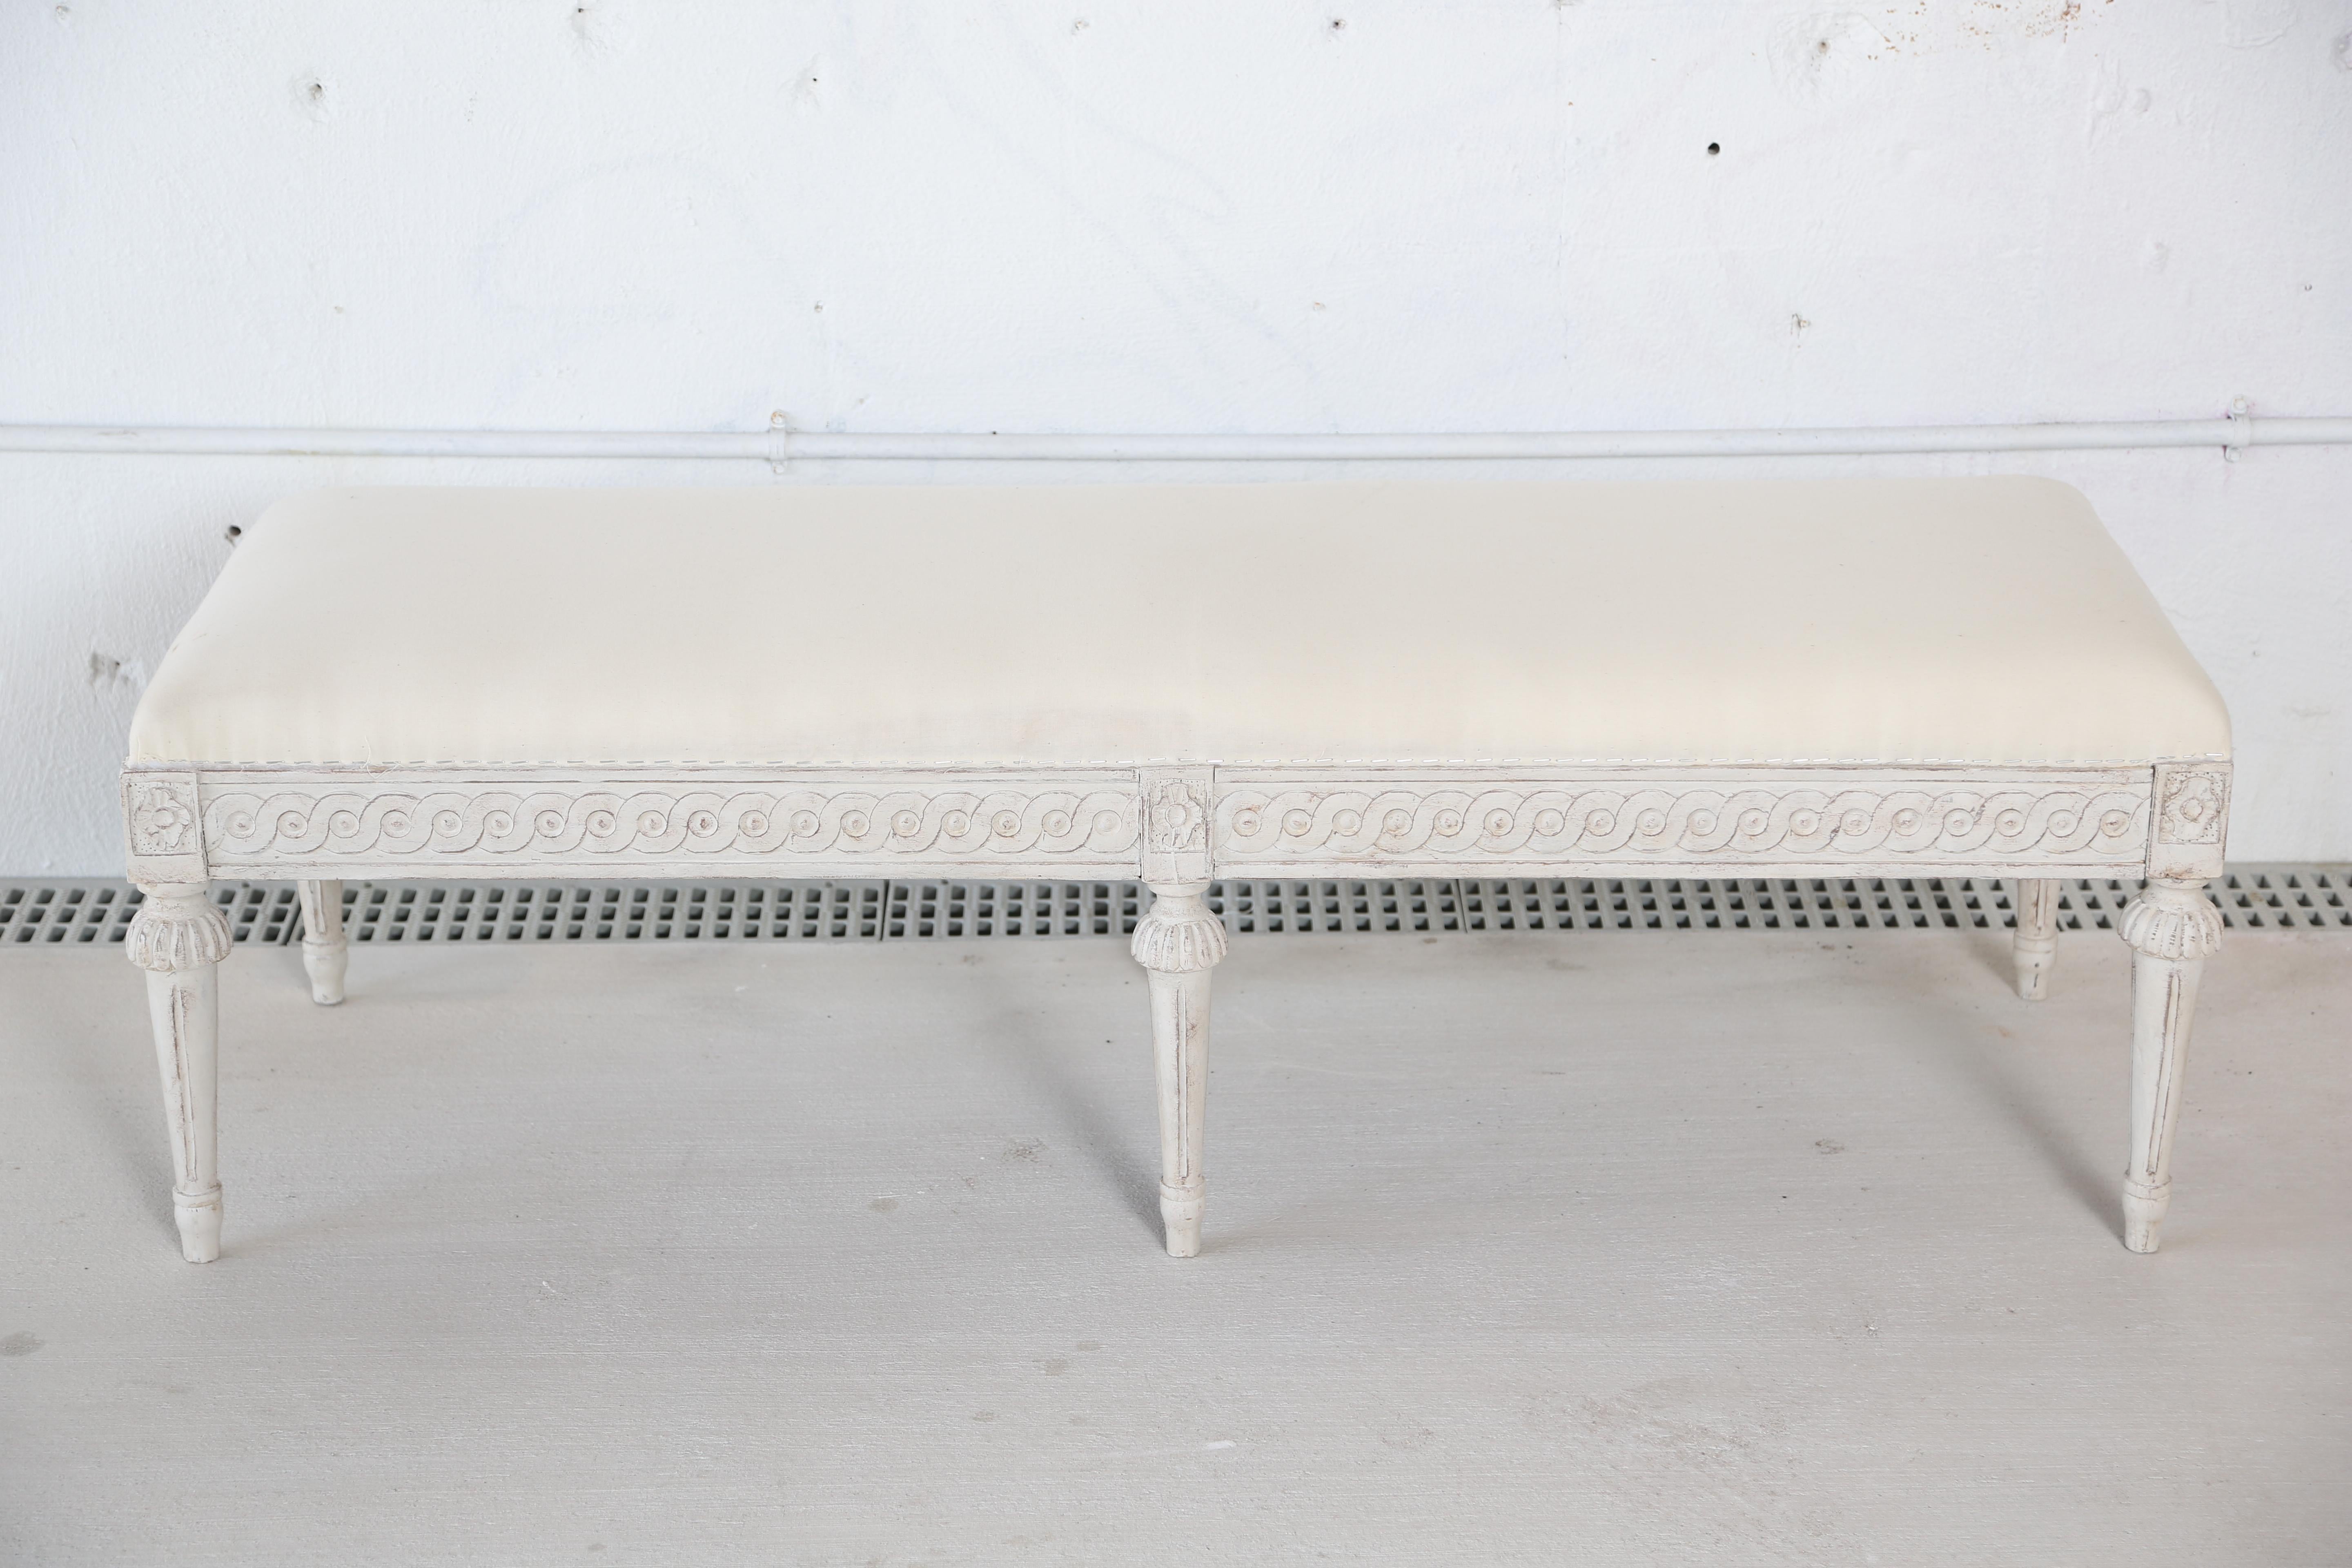 Antique Swedish Gustavian style painted six-leg bench antique Swedish style white painted six-leg bench with upholstered top.
Lovely circular carved border below the seat and a carved rosette above each leg.
Tapered fluted legs with a leaf carved